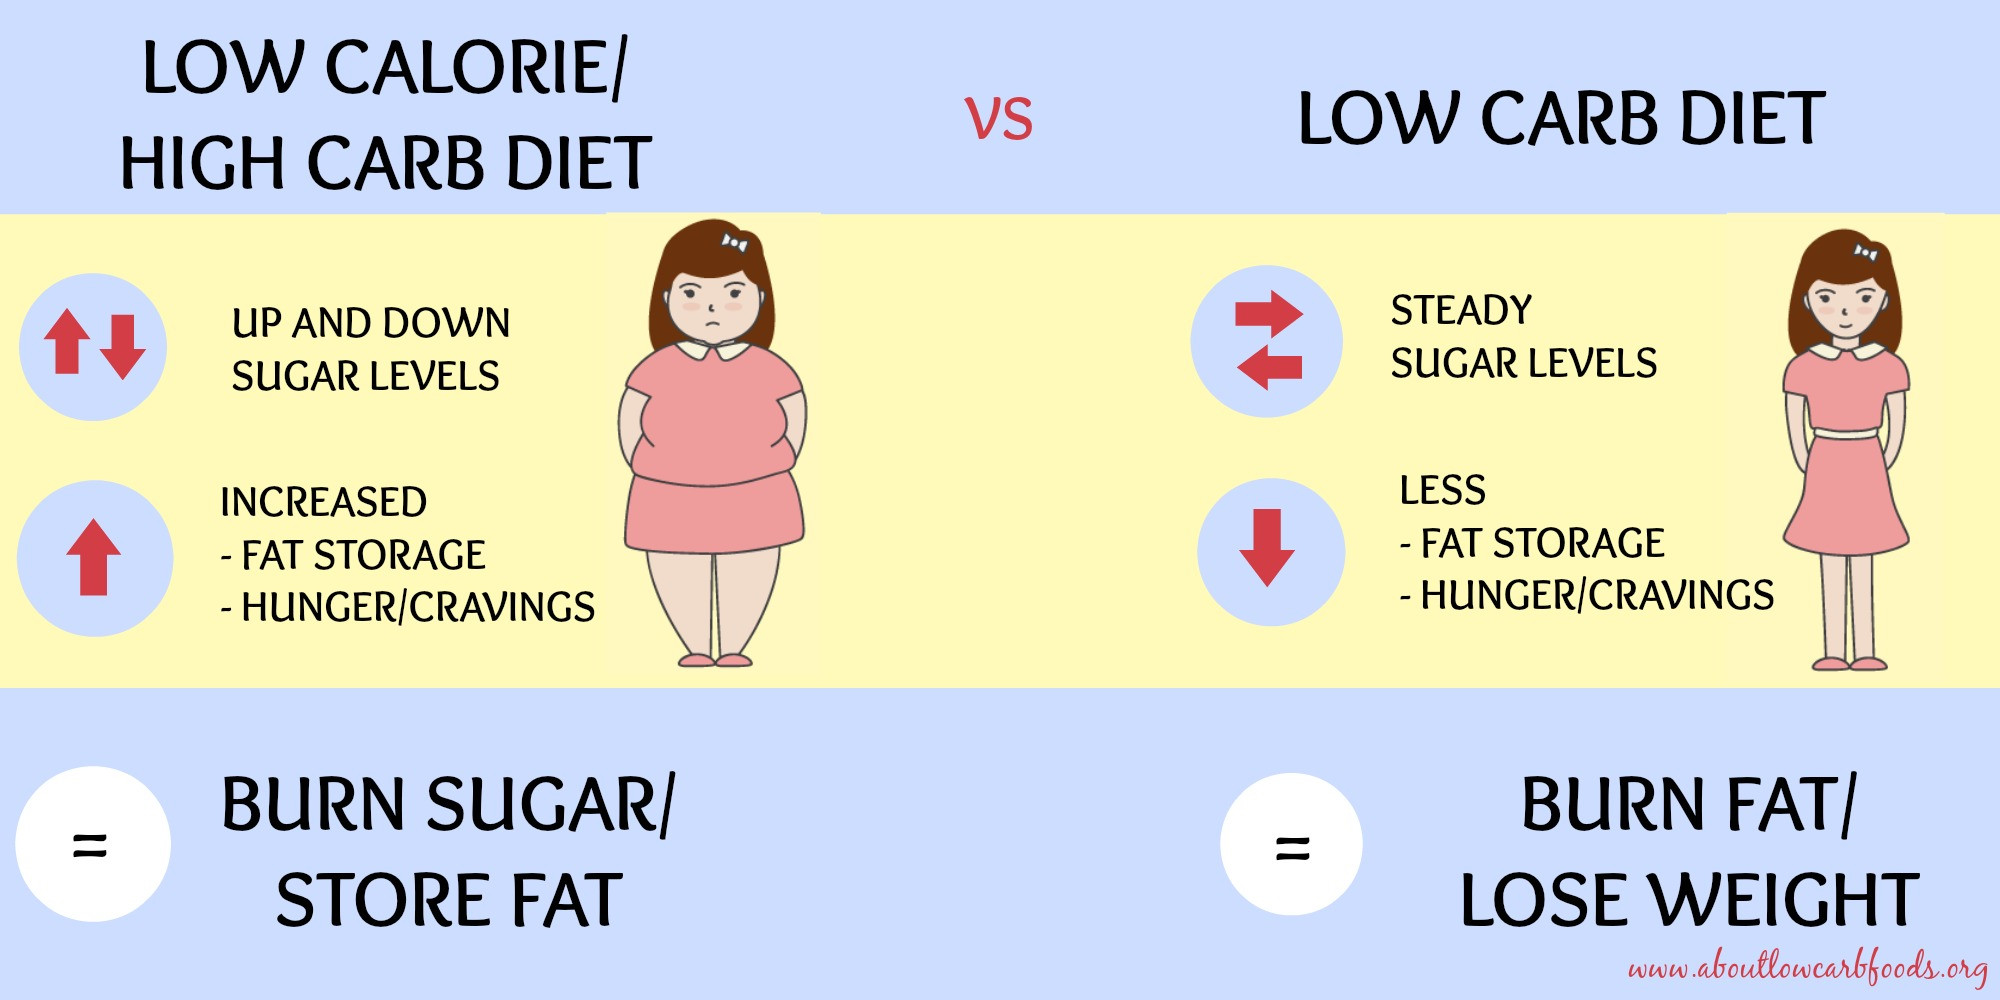 Low Carbohydrate Diet Losing Weight
 How to Lose Belly Fat 7 Proven Ways About Low Carb Foods